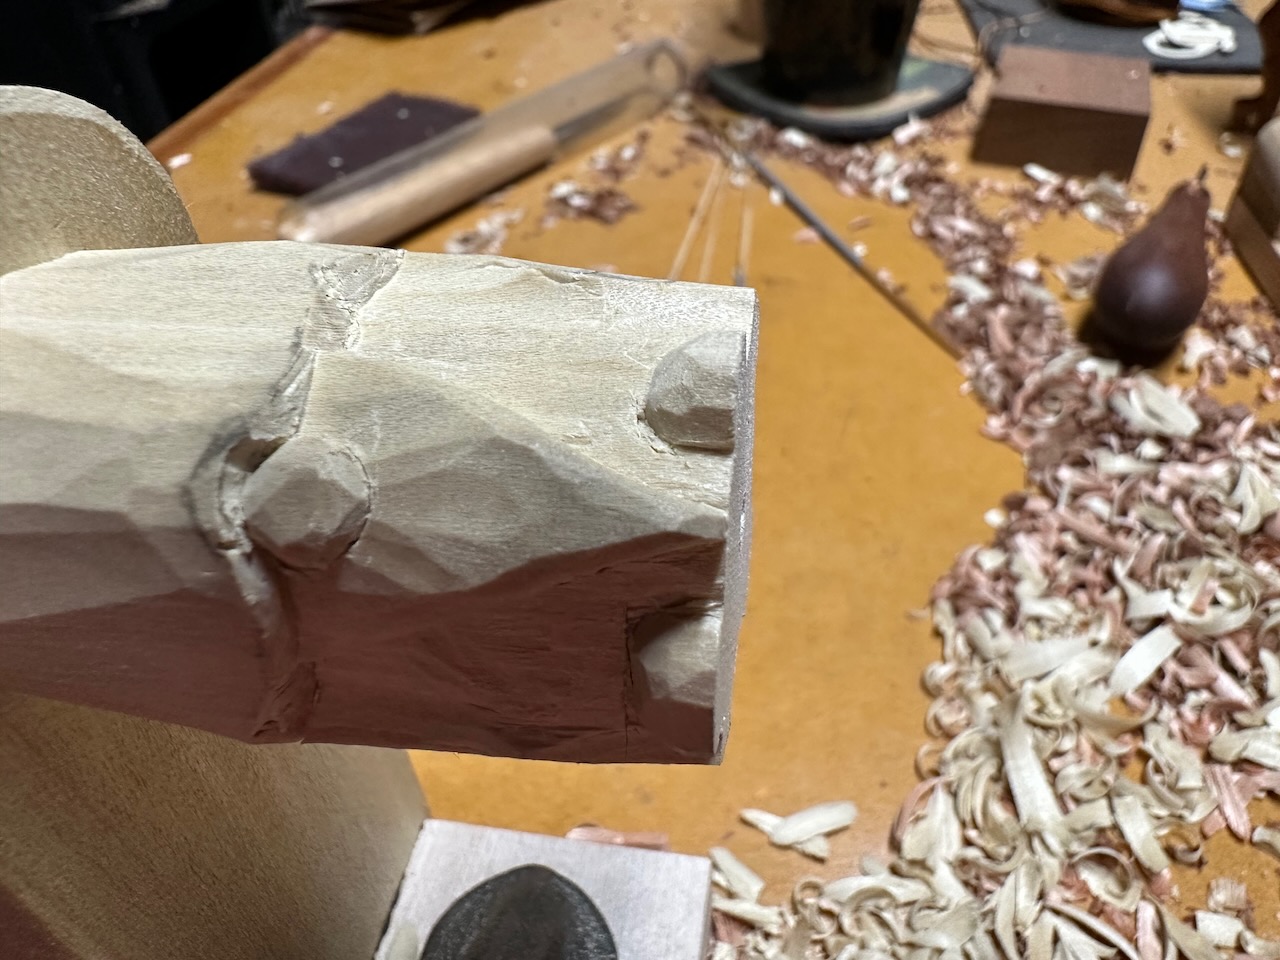 PARTLY-CARVED BEAD. WORK IS BEING DONE ON THE SIDE NOT TOUCHING THE JIG. PHOTO BY AUTHOR.